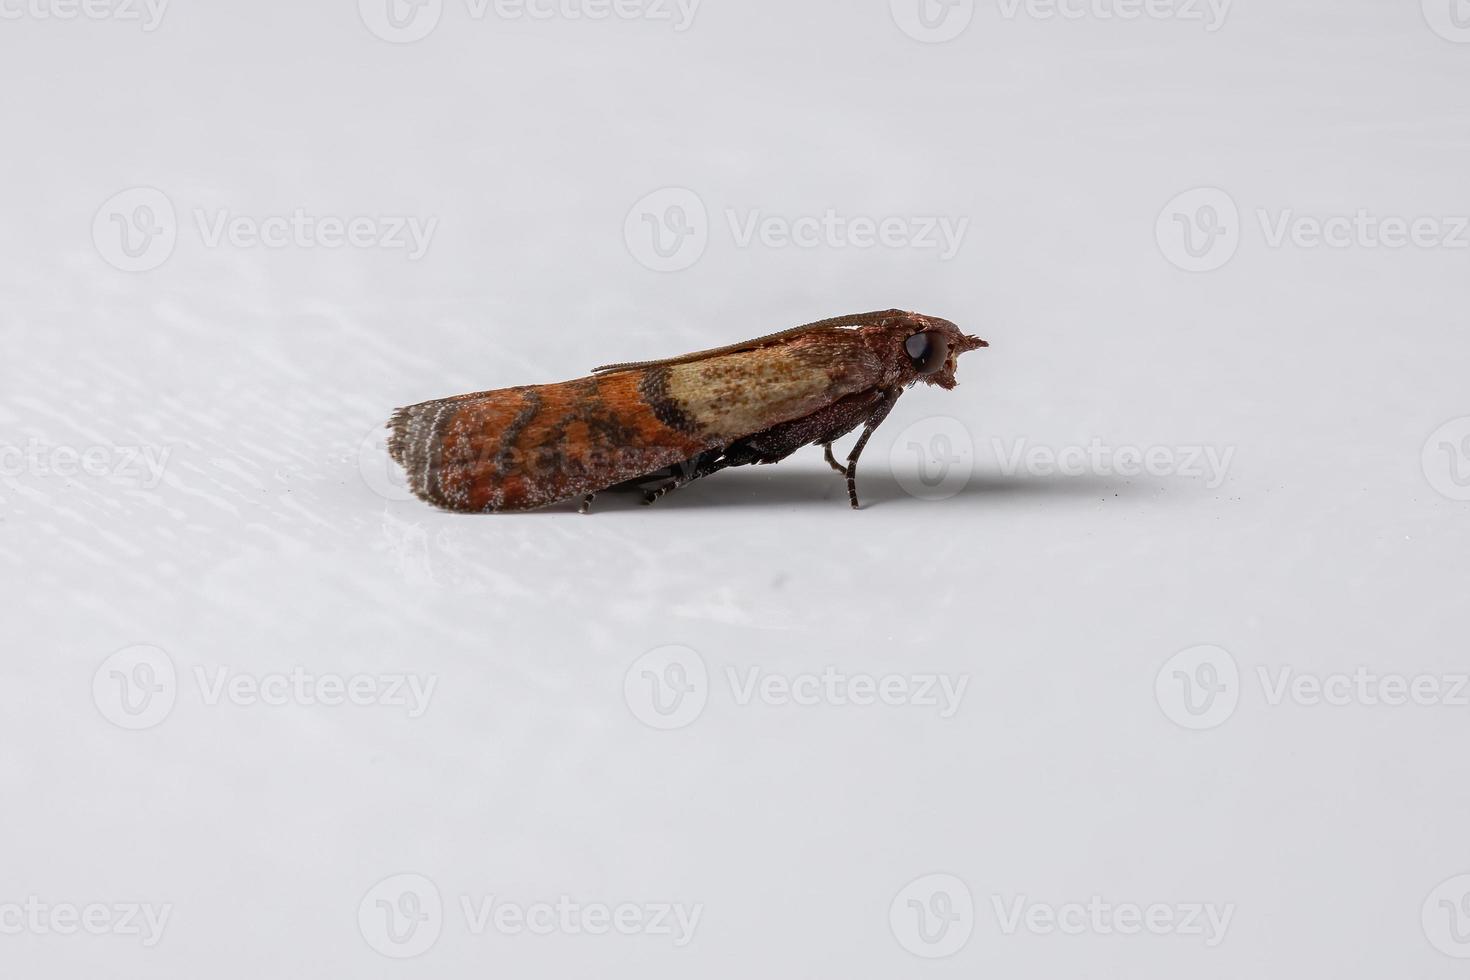 Indian Meal Moth photo